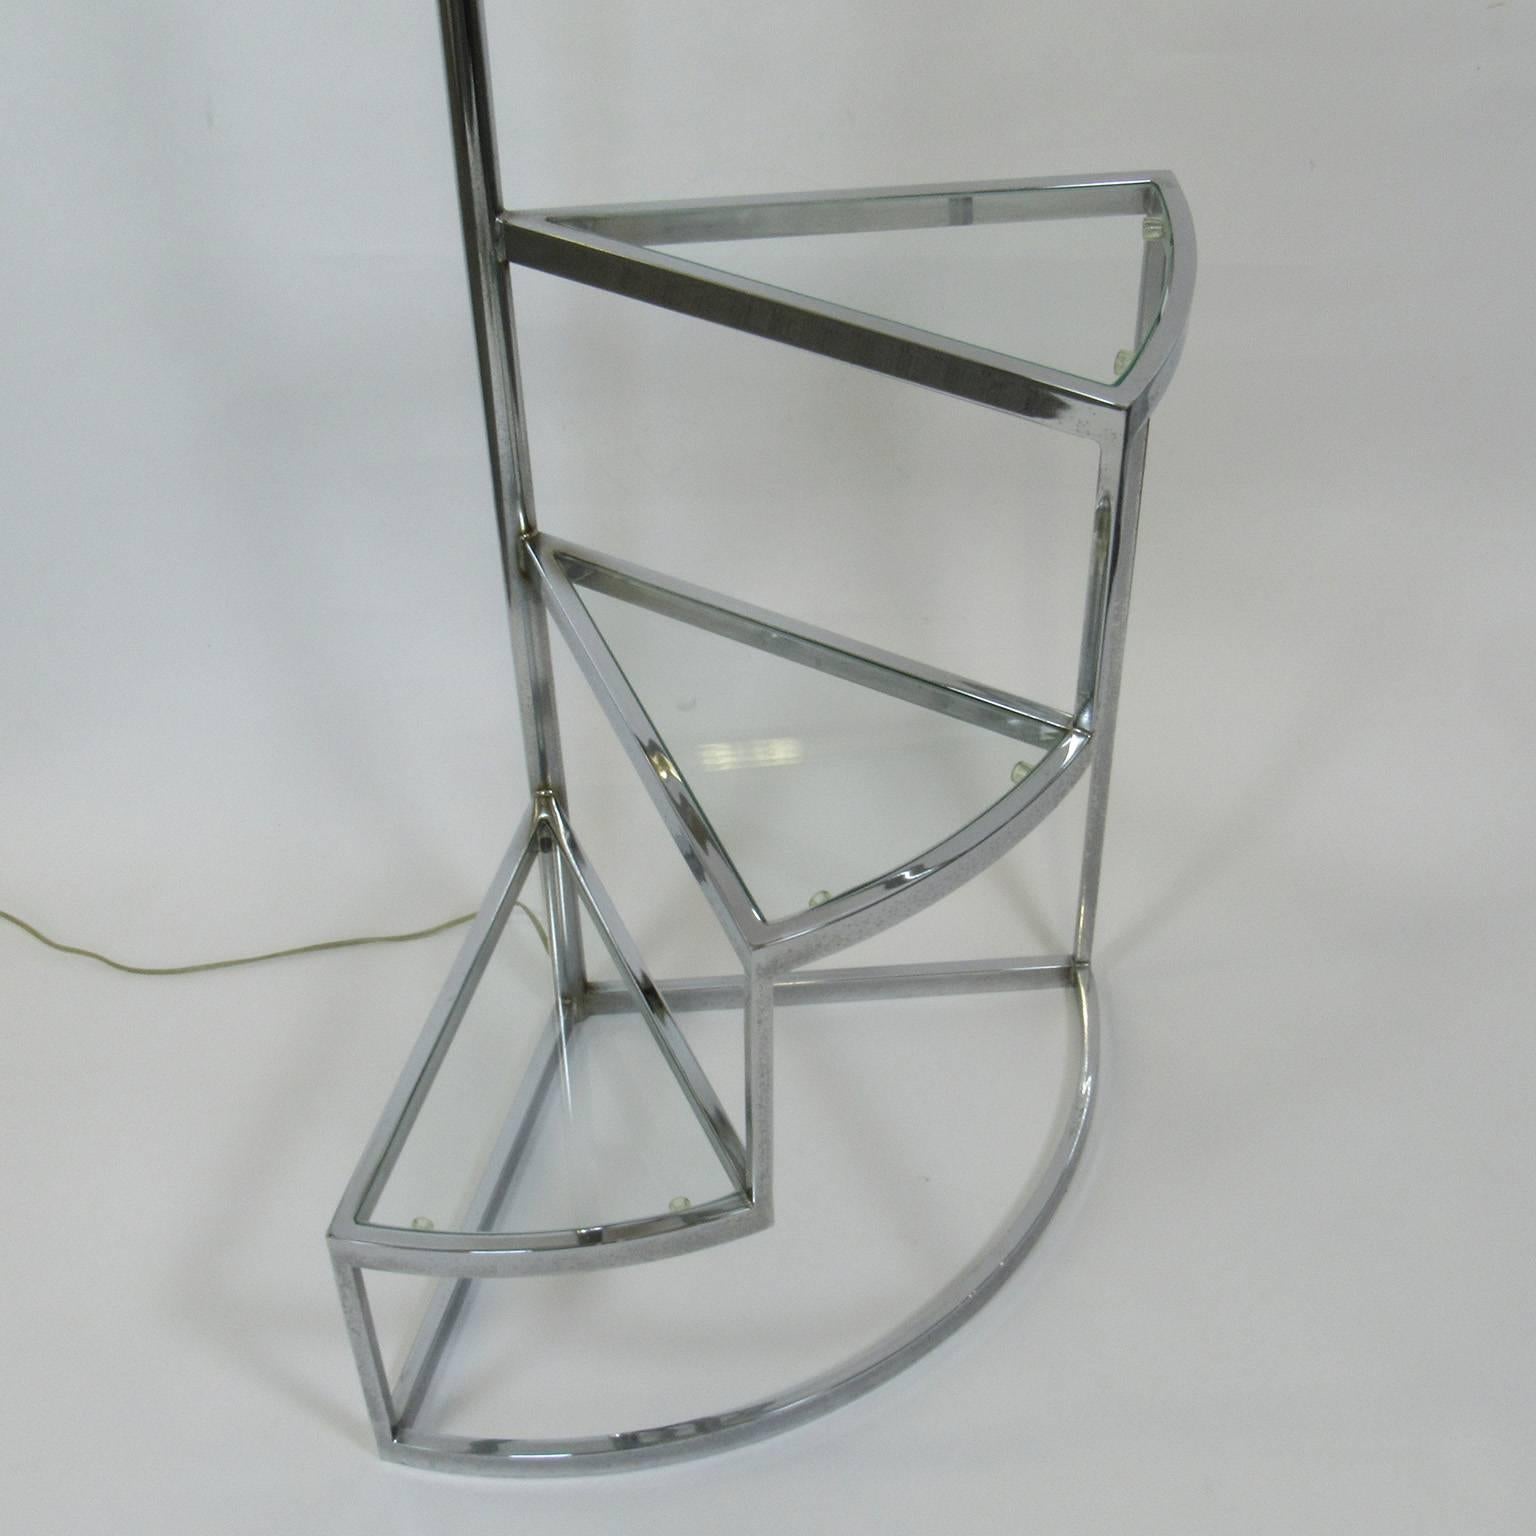 Modernist chrome and glass three-tiered table lamp. Measures: Overall height: 59 inches, étagère: 26 x 16 inches.